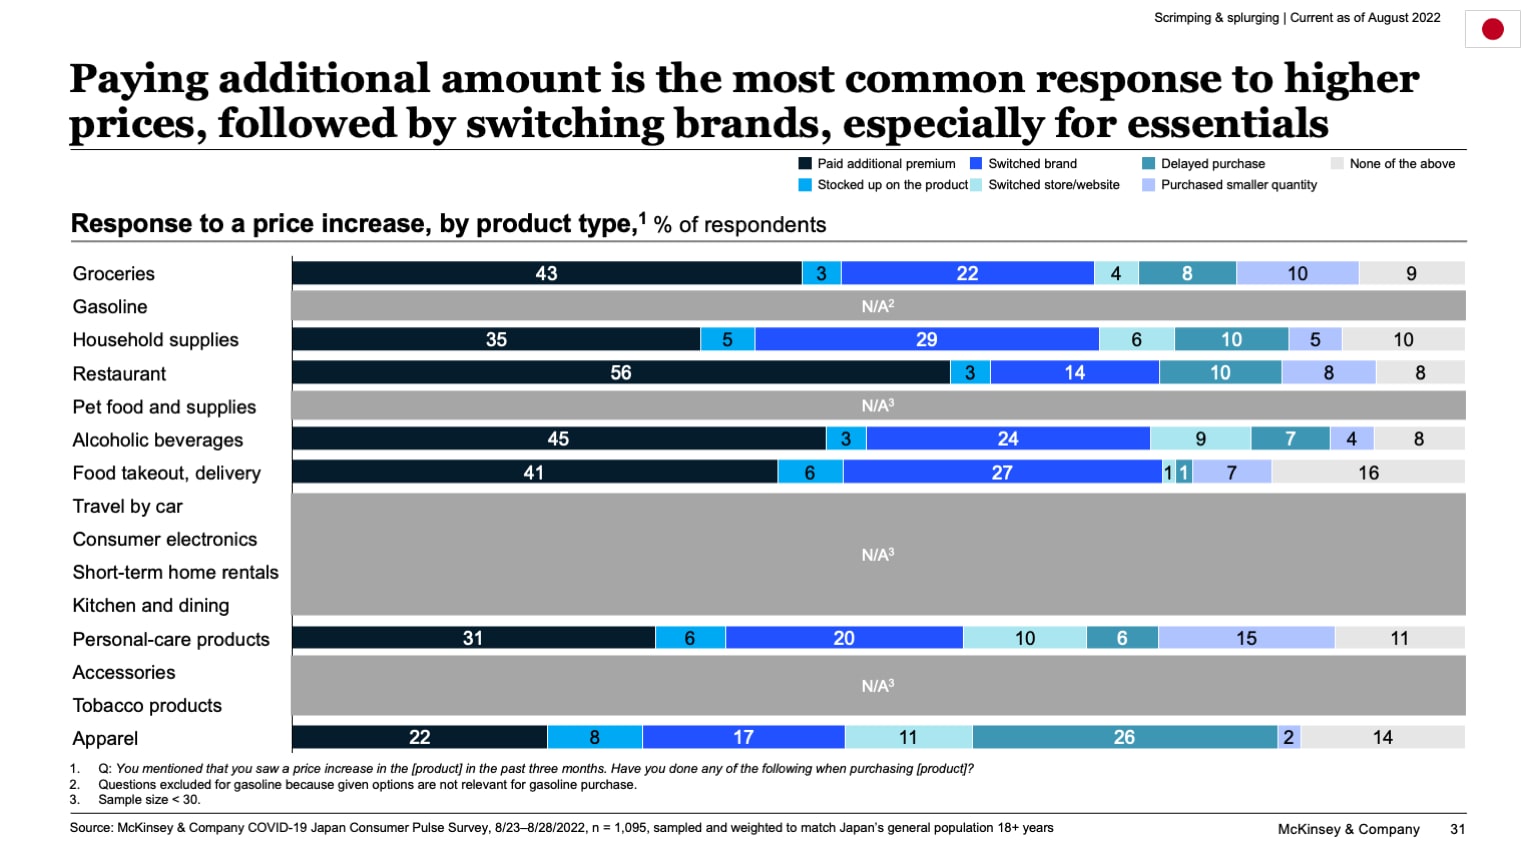 Paying additional amount is the most common response to higher prices, followed by switching brands, especially for essentials